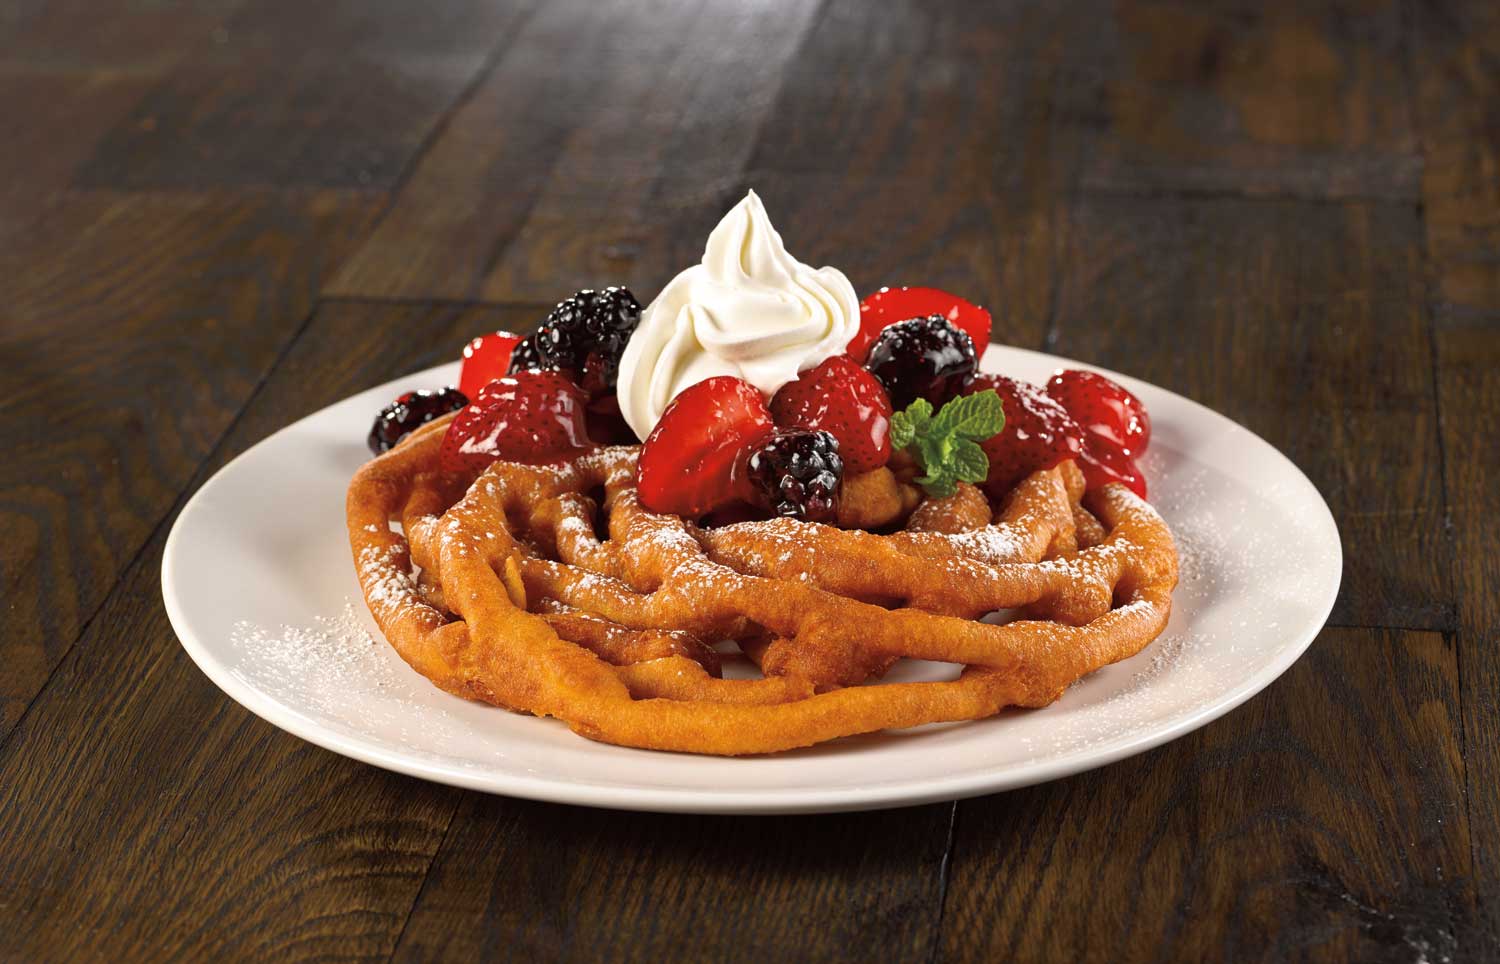 J and J Snack Cake Factory Funnel Cake, 5 Inch -- 48 per case